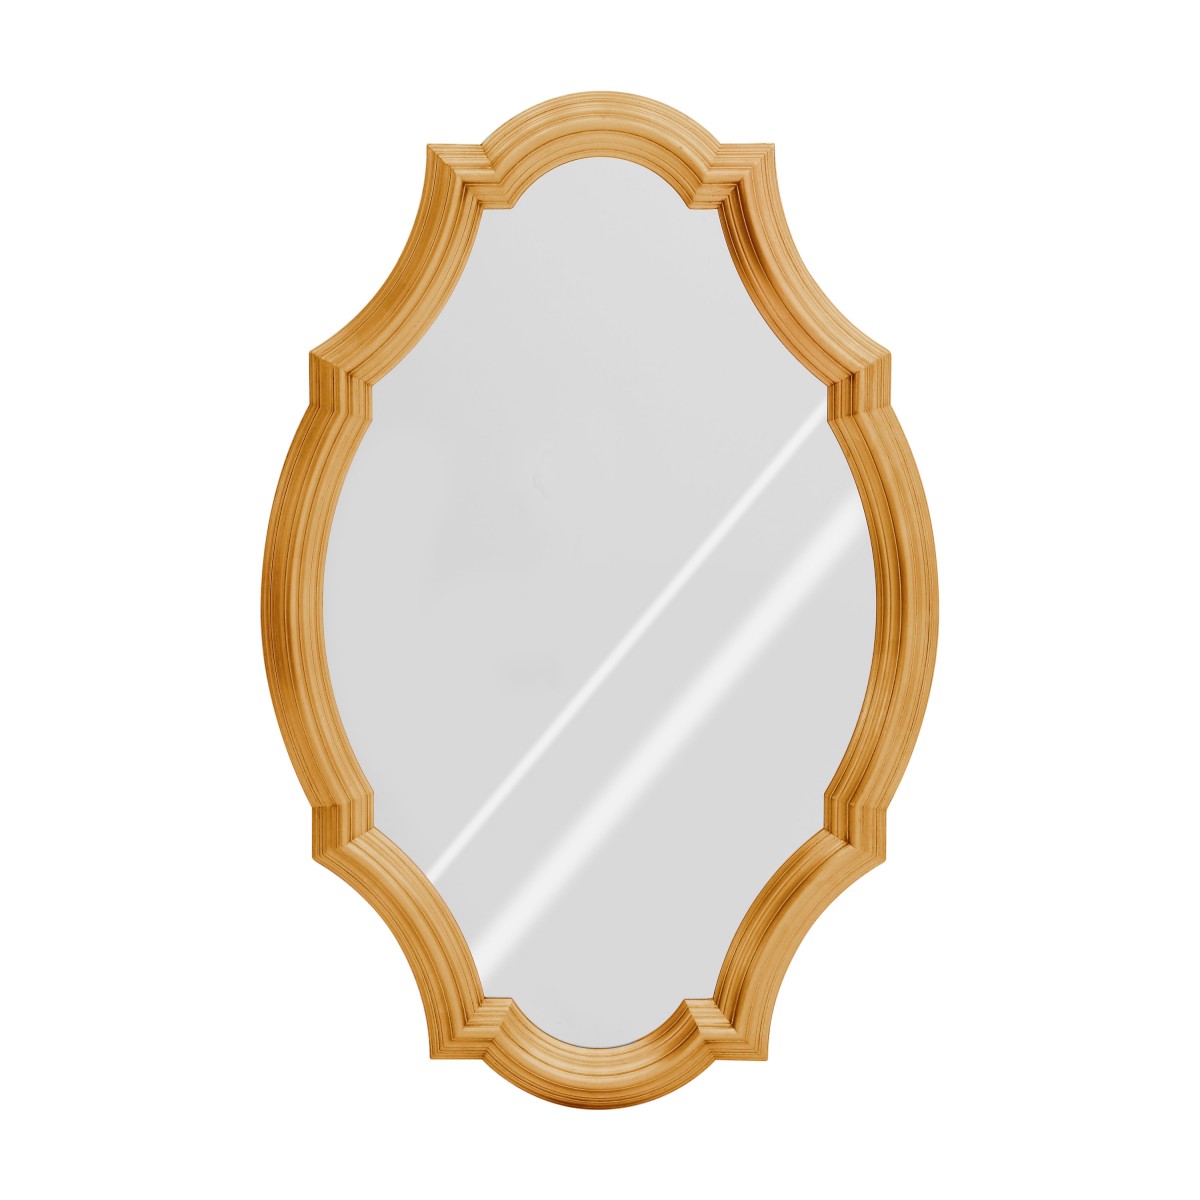 classic style wooden mirror